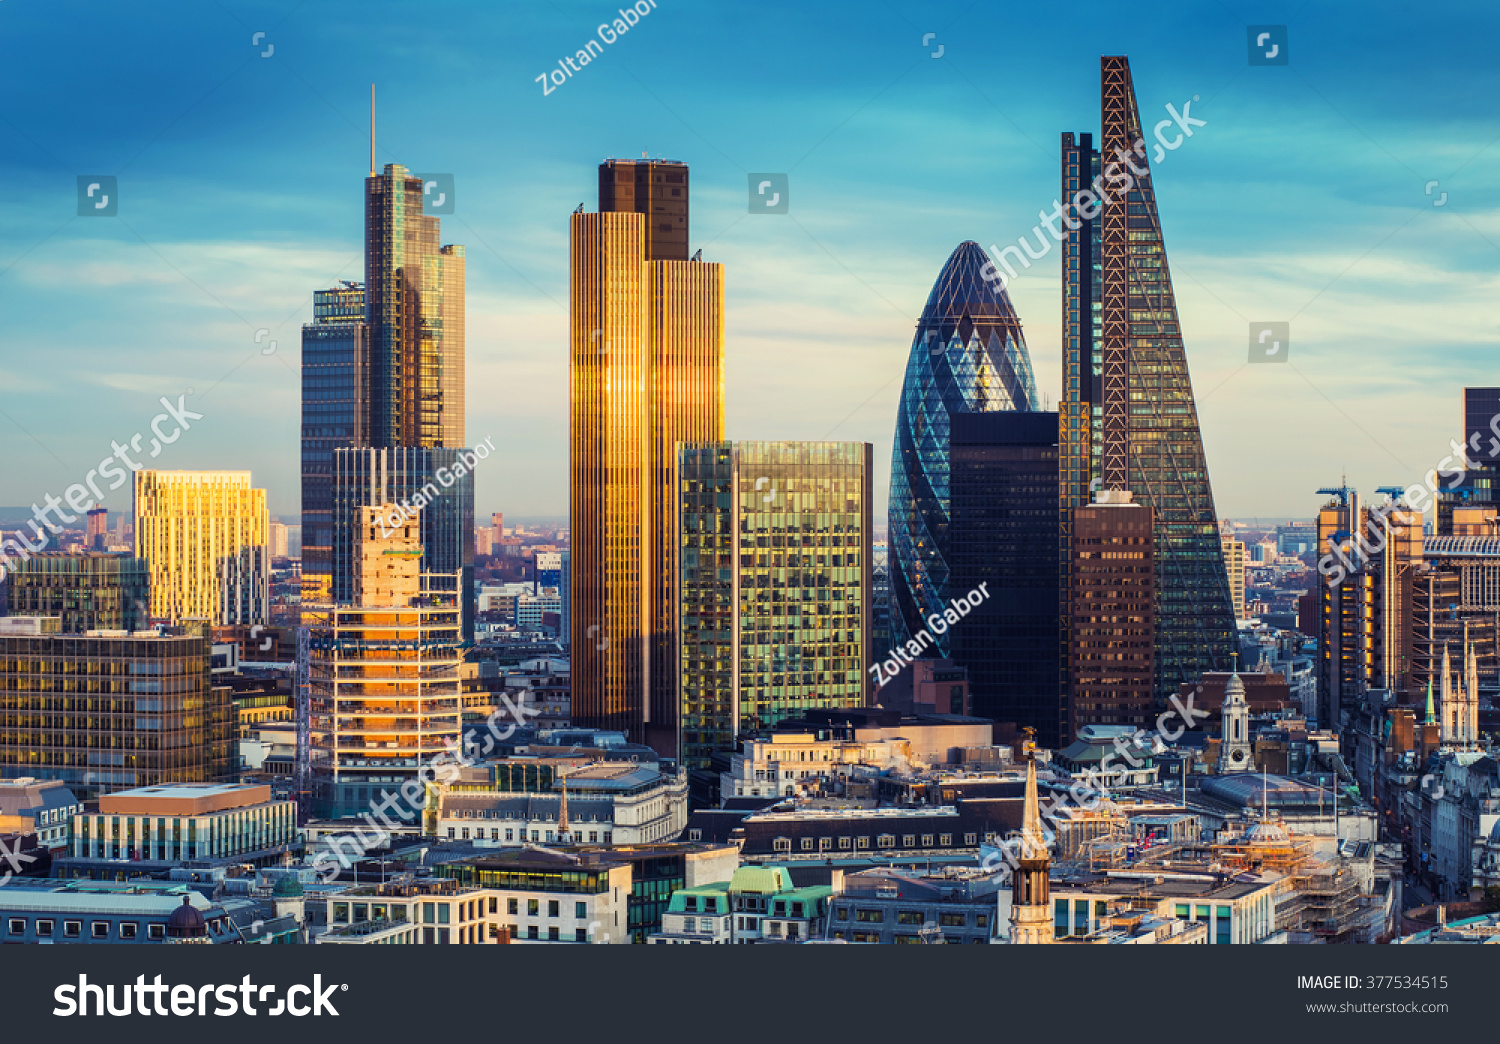 London, England - The bank district of central London with famous skyscrapers and other landmarks at sunset with blue sky - UK #377534515